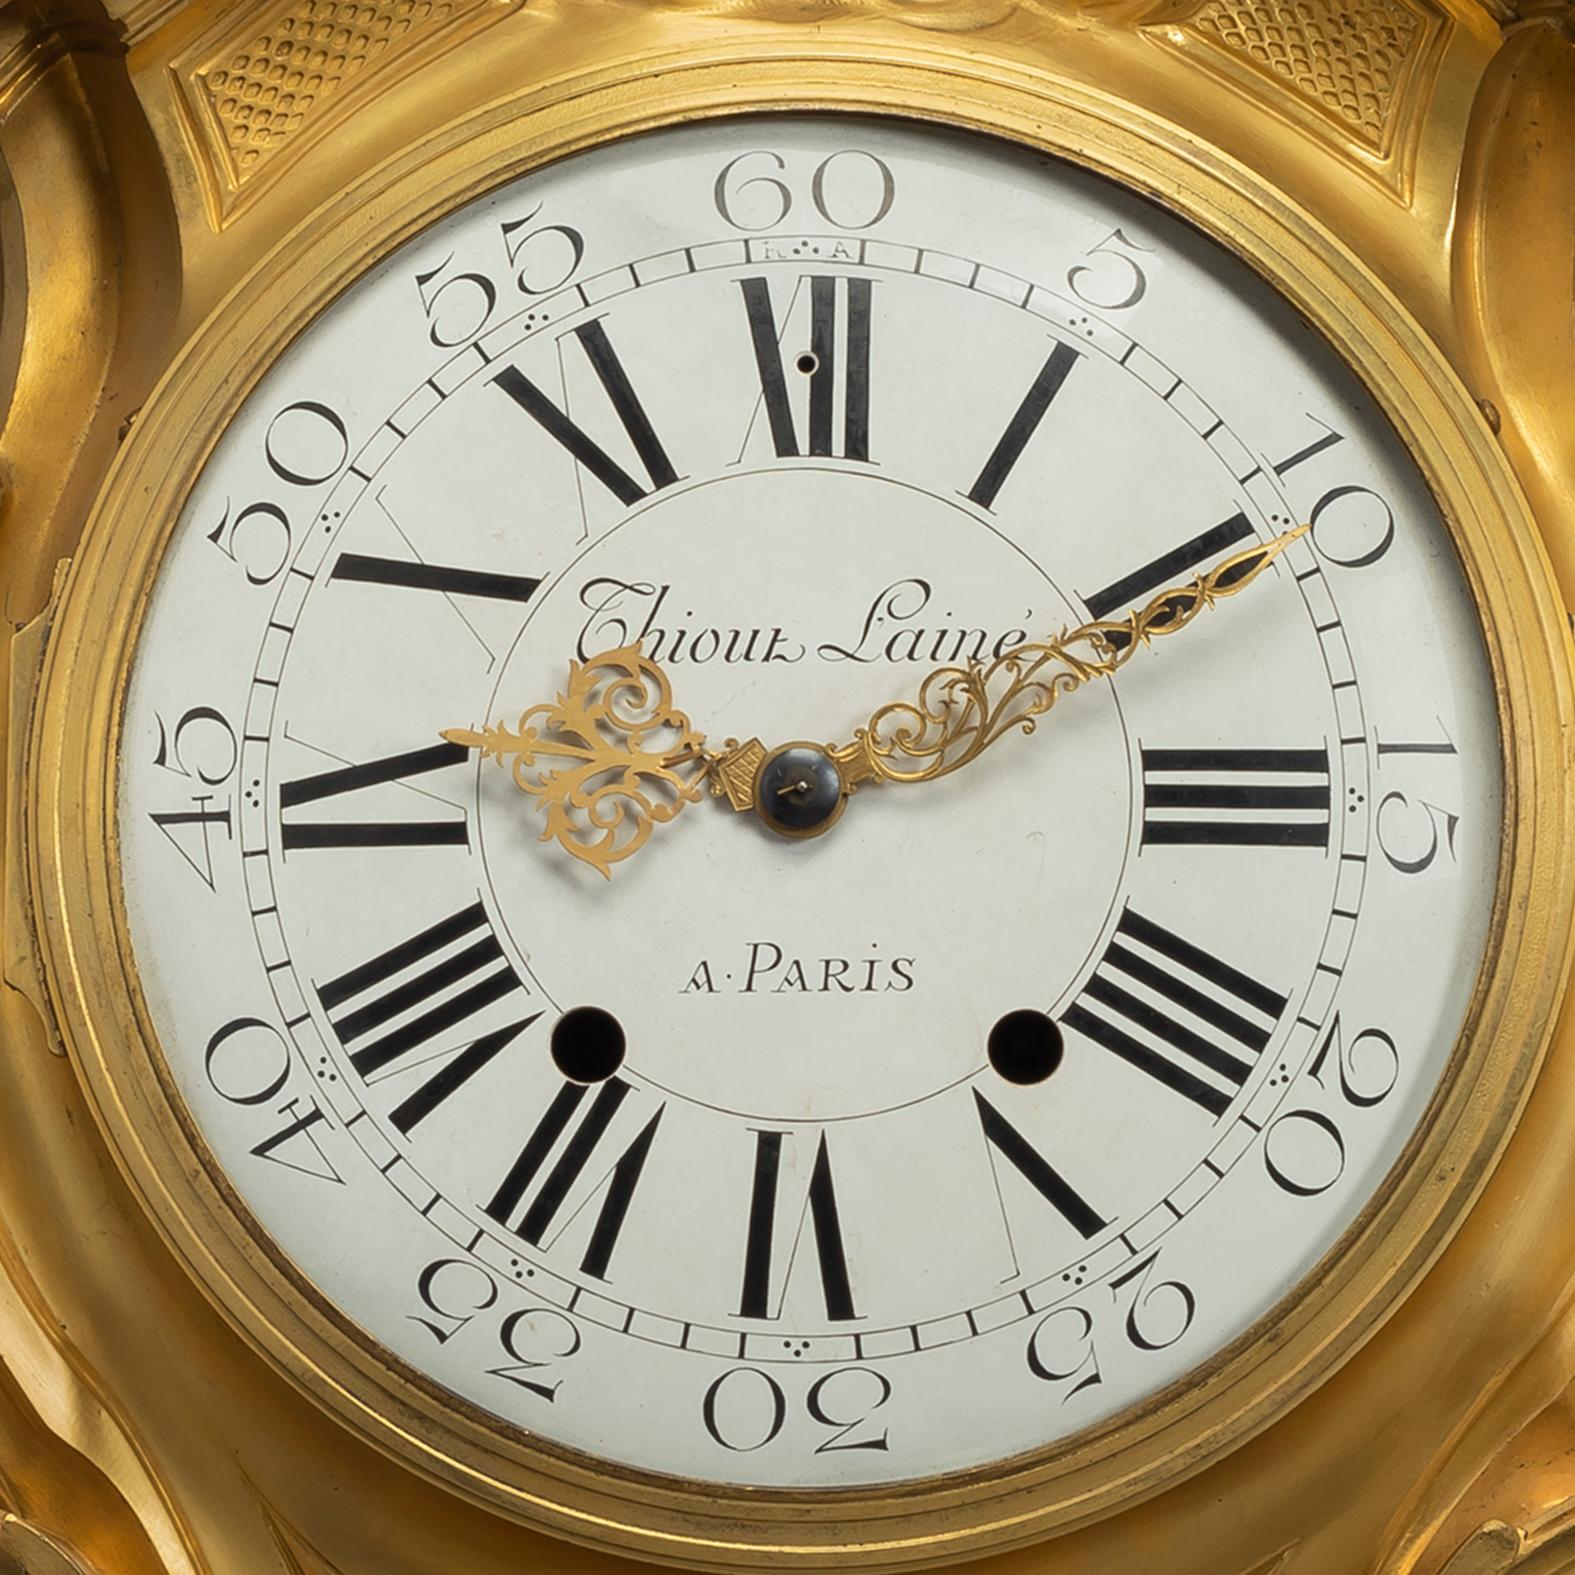 A fine Louis XV style gilt-bronze cartel d'Applique, after a model by Jacques Caffieri.

The white enamel dial inscribed 'Thiout Lainé/A PARIS', with hours in Roman numerals and seconds in Arabic numerals, with pierced gilt-bronze scrolling hands.